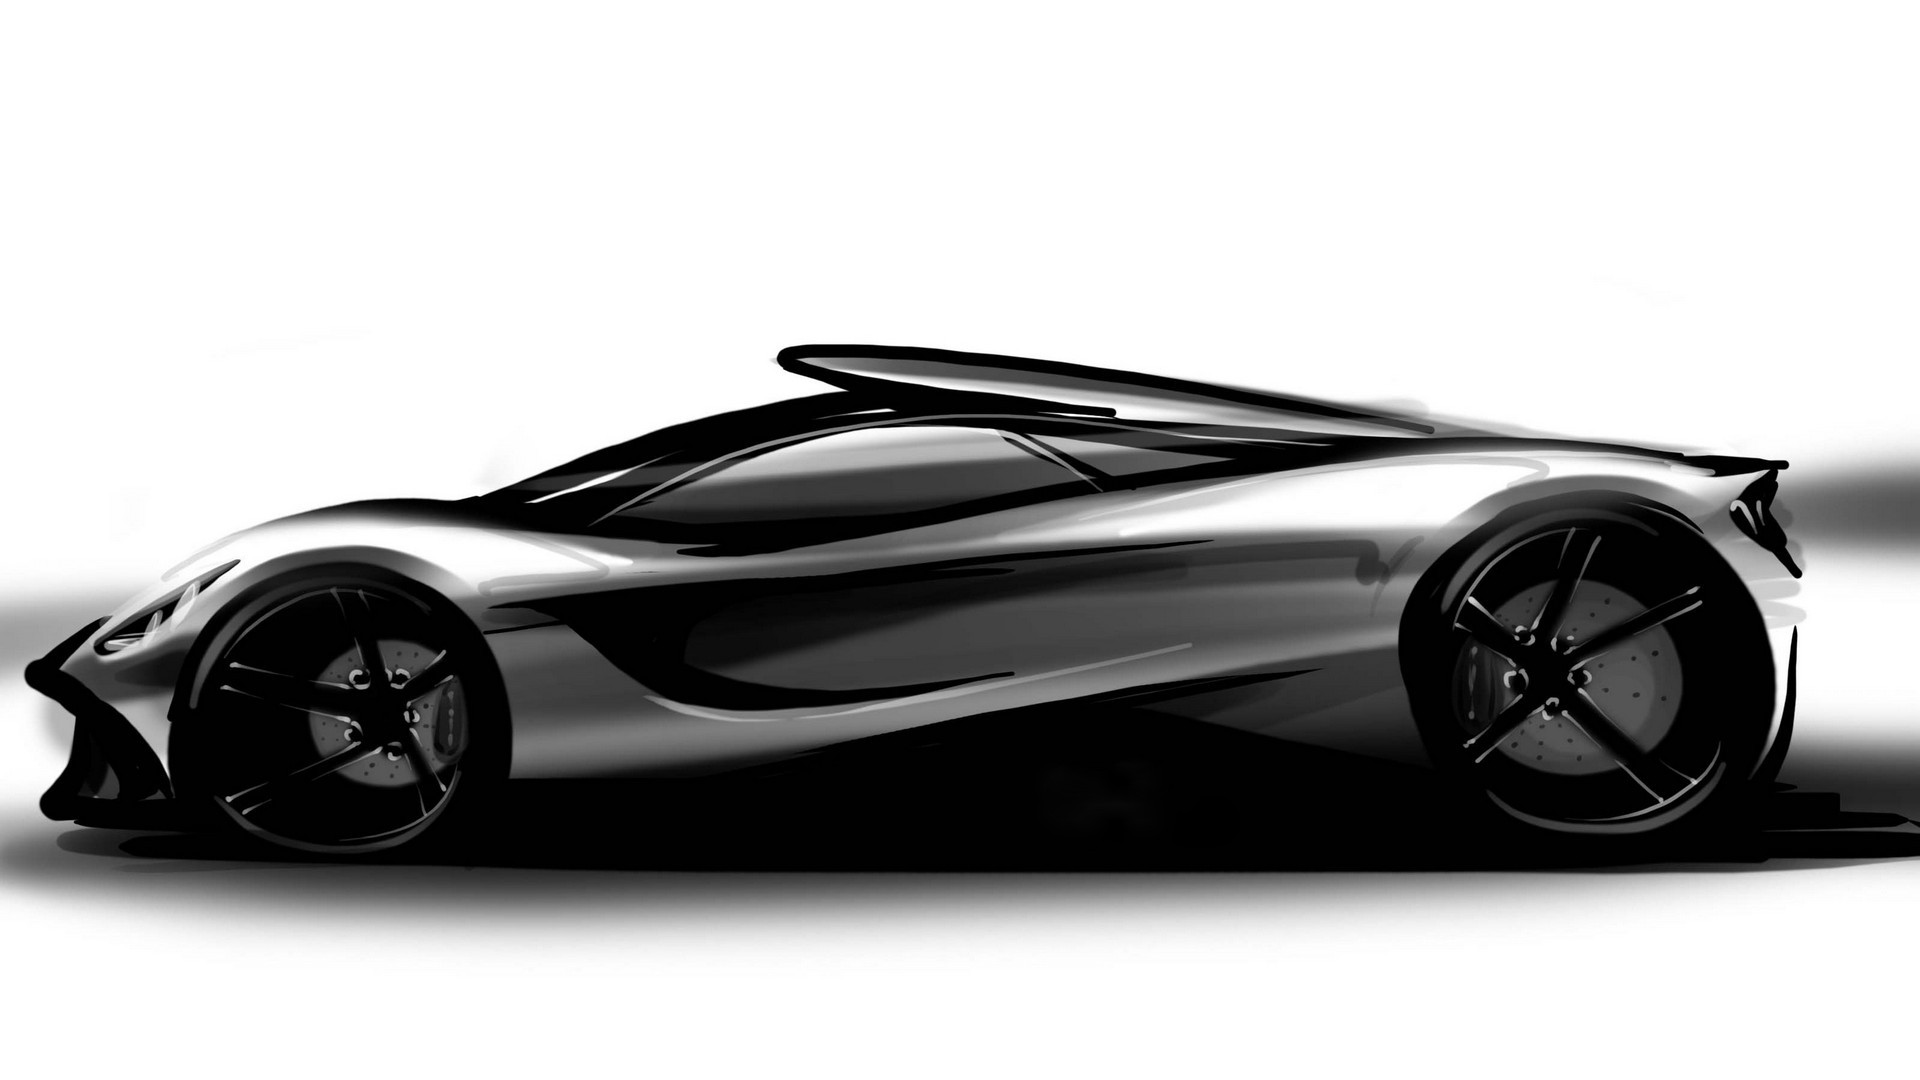 Wallpapers sports car hand-drawn black and white on the desktop